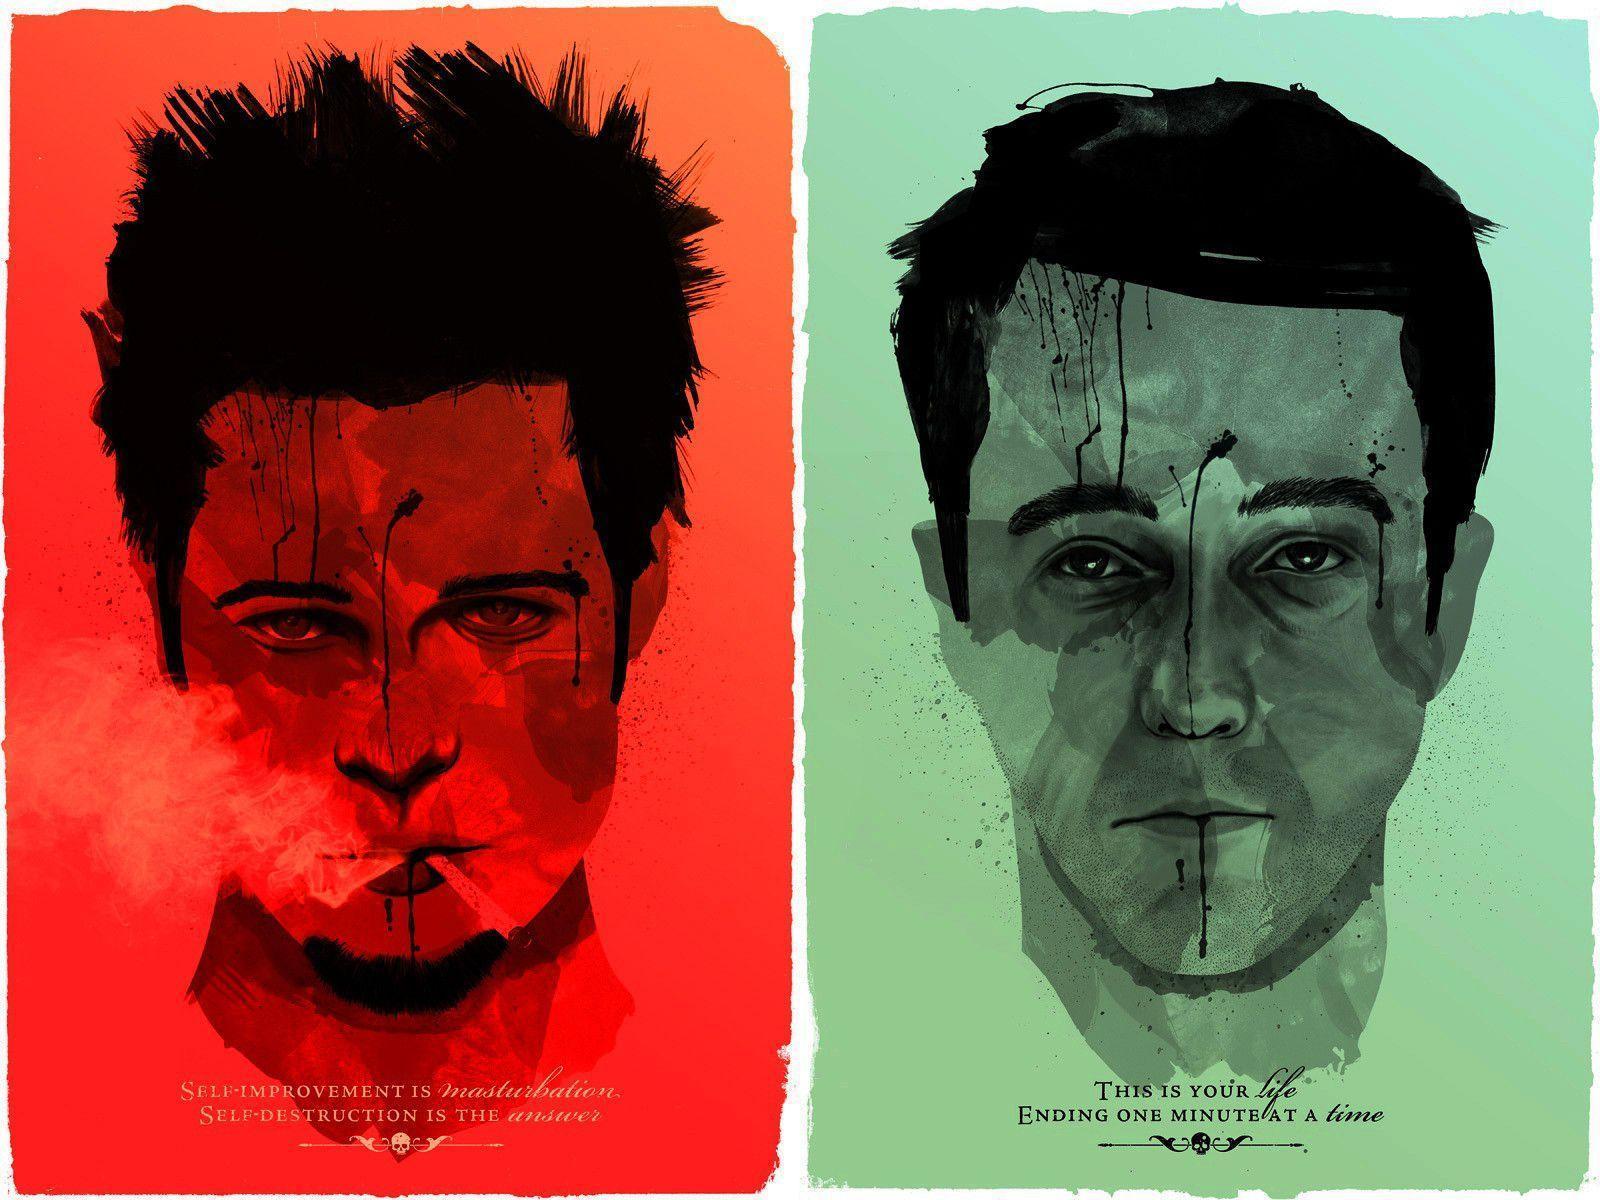 Fight Club Wallpapers - Top Free Fight Club Backgrounds - WallpaperAccess